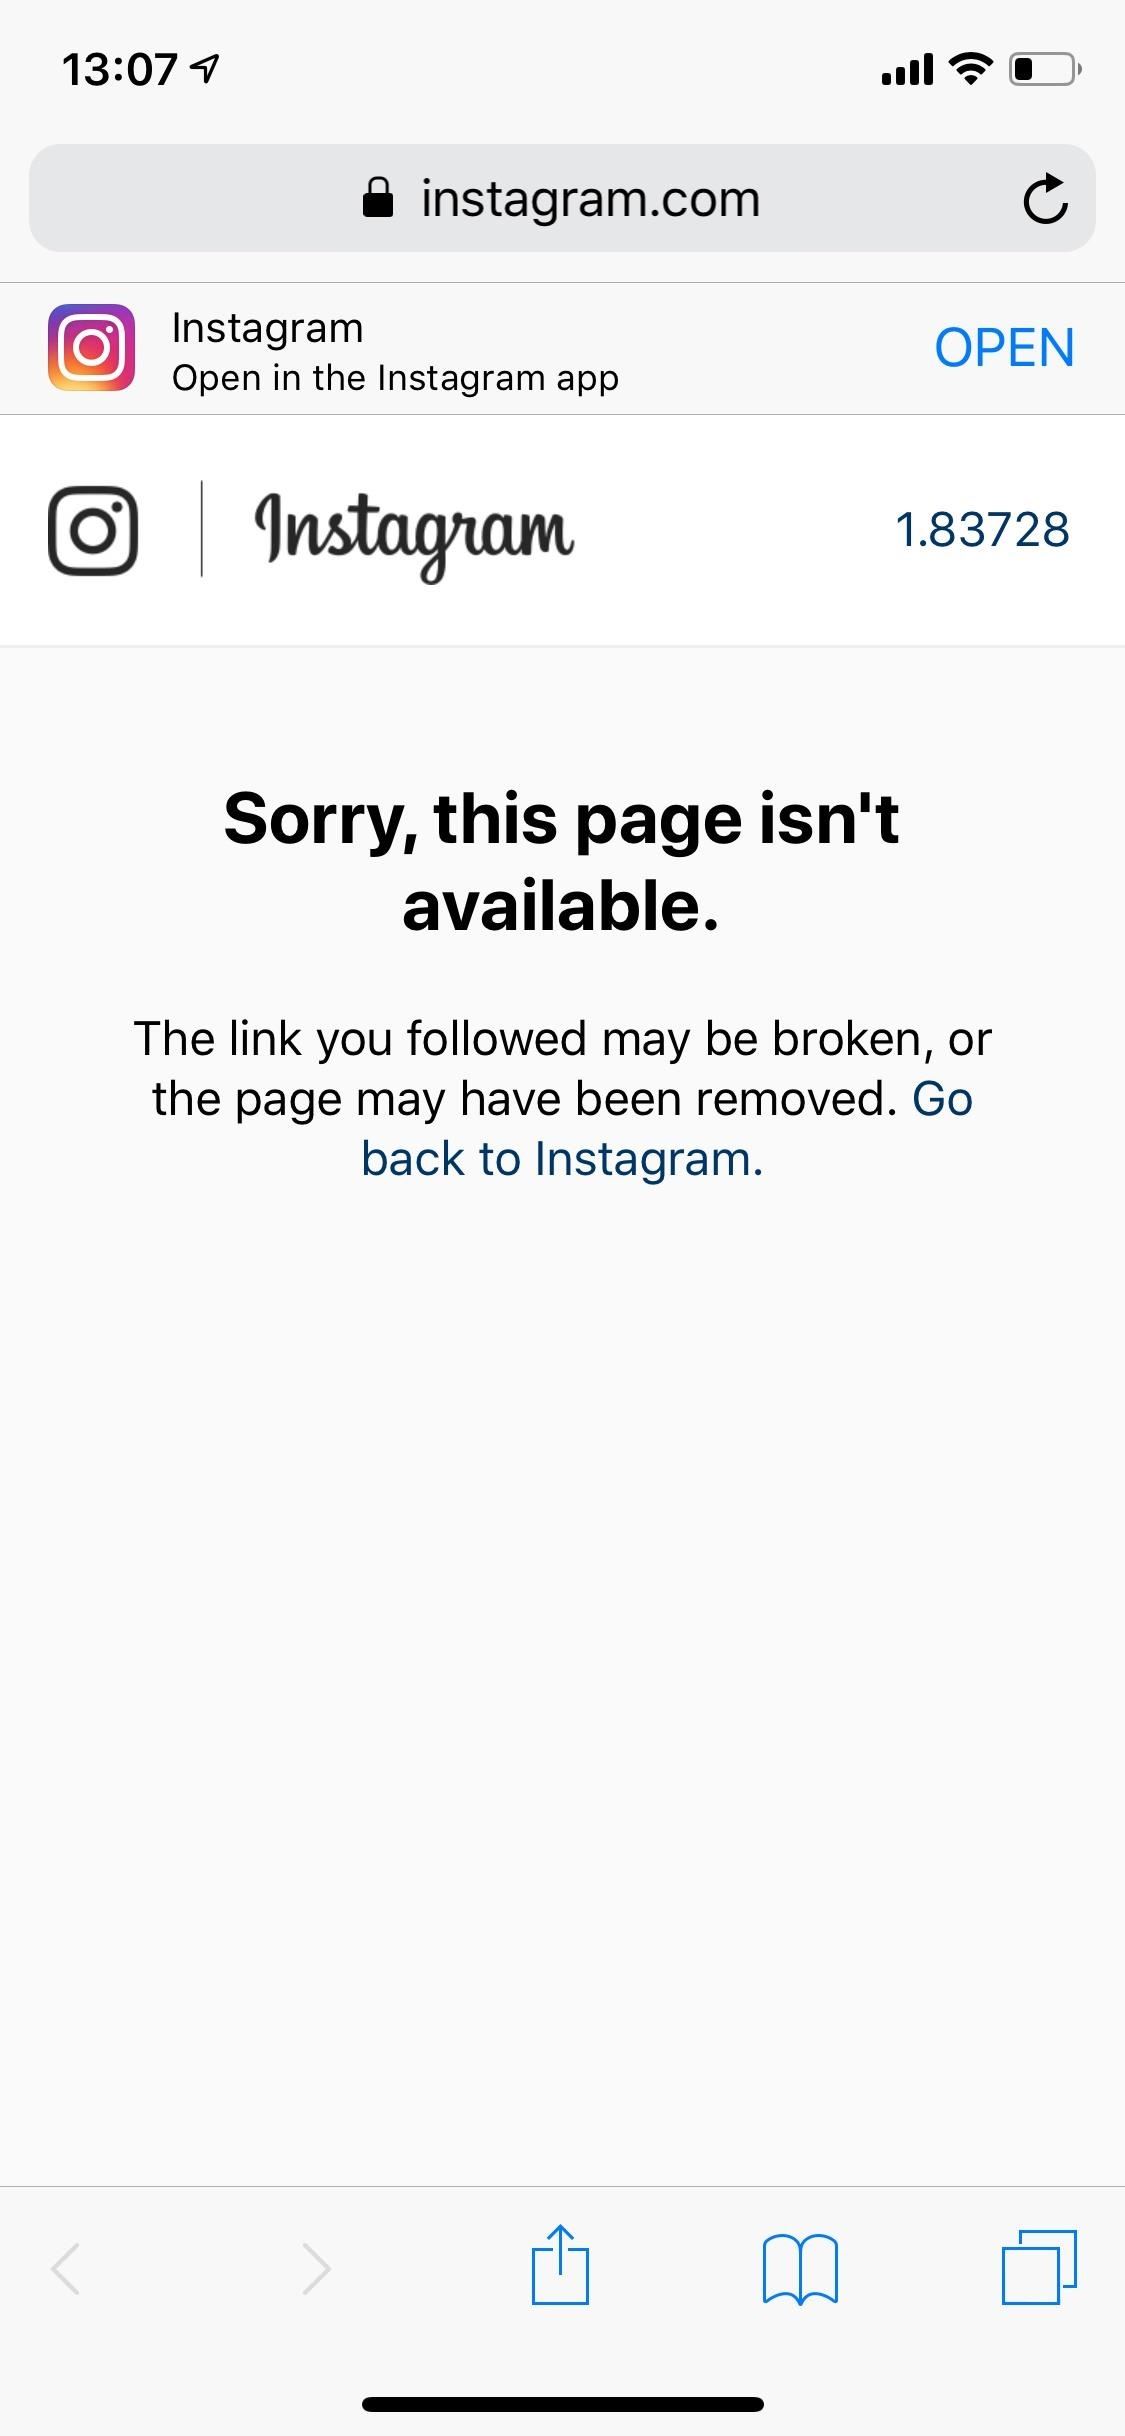 How to Temporarily Disable Your Instagram Account When You Need to Take an #InstaBreak